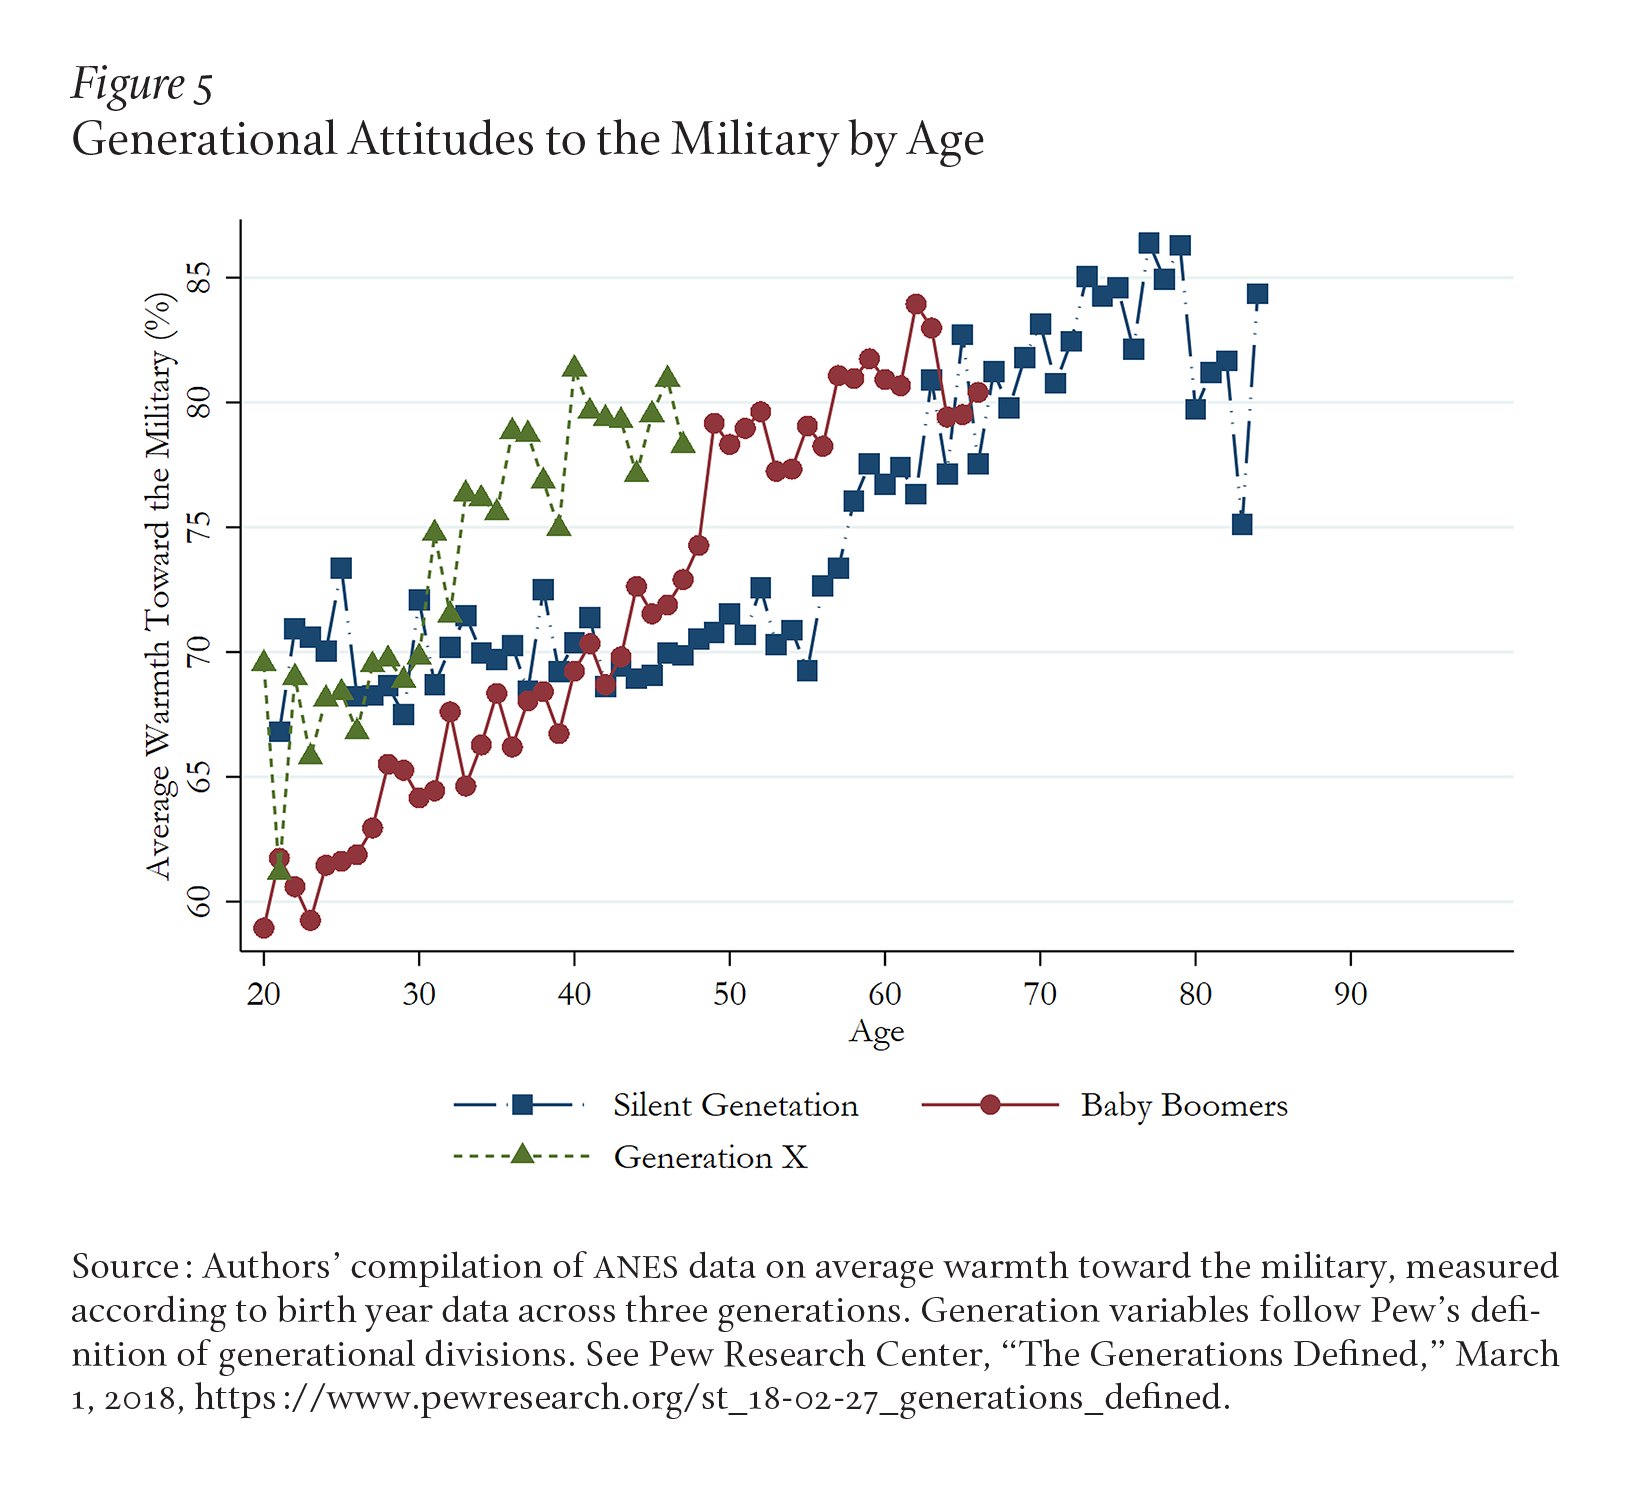 Figure 5 shows the trend of warmth toward the military increasing with age, and greater warmth among older generations than young.